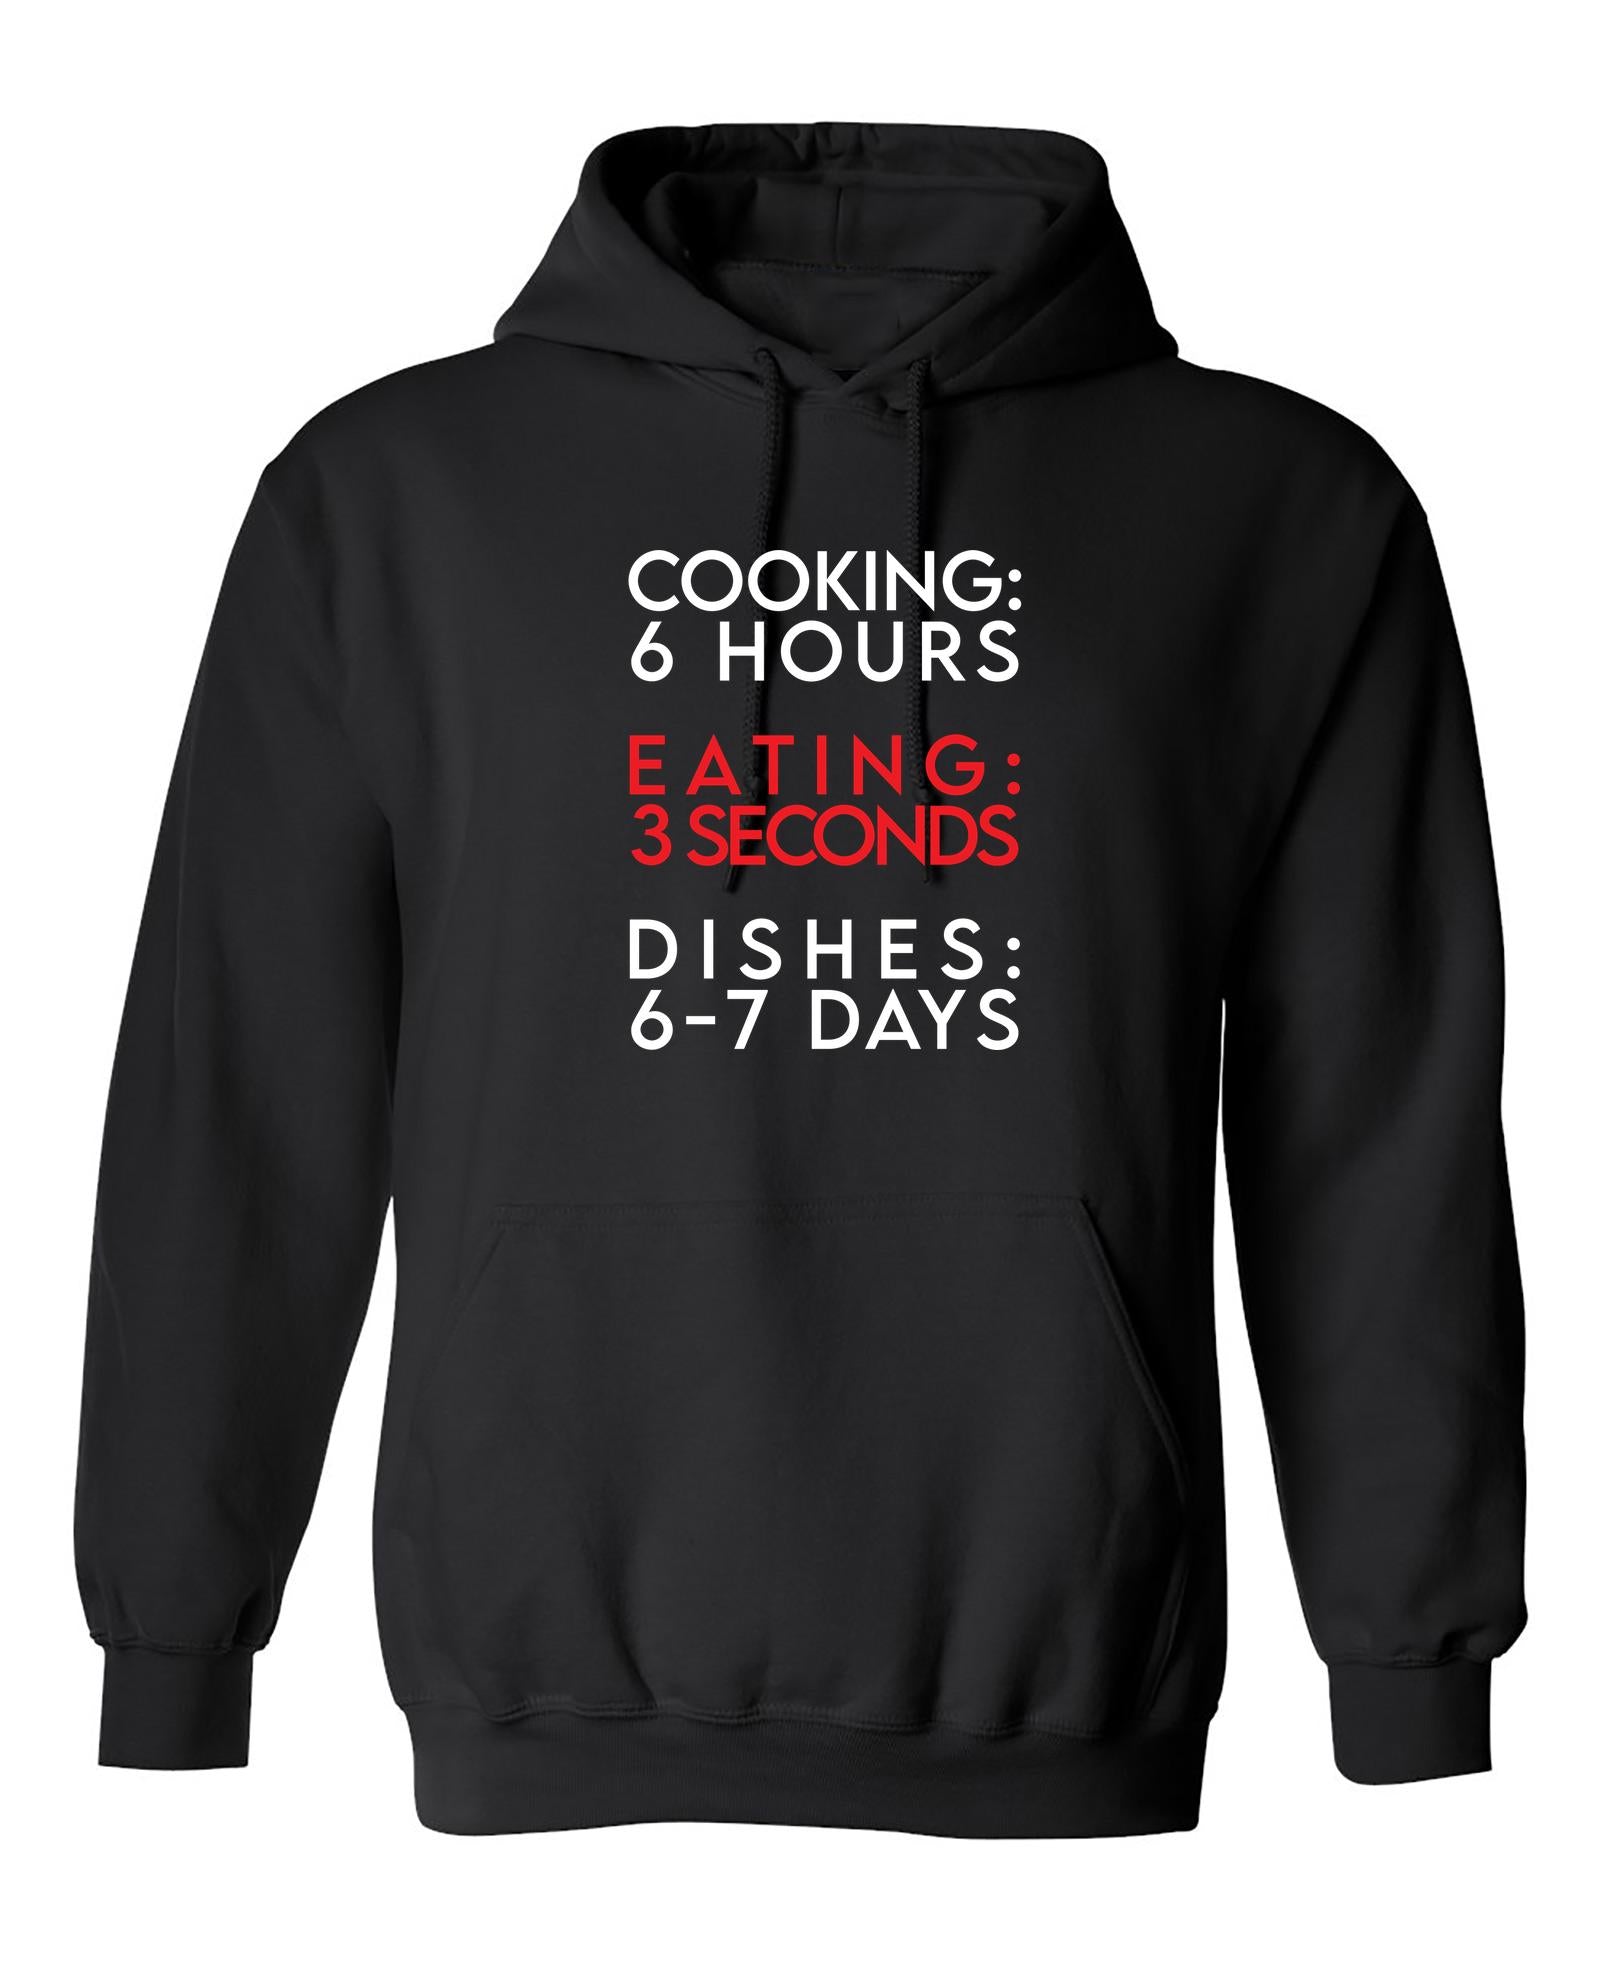 Funny T-Shirts design "Cooking 6 Hours, Eating 3 Seconds, Dishers 6-7 Days Funny Tee"